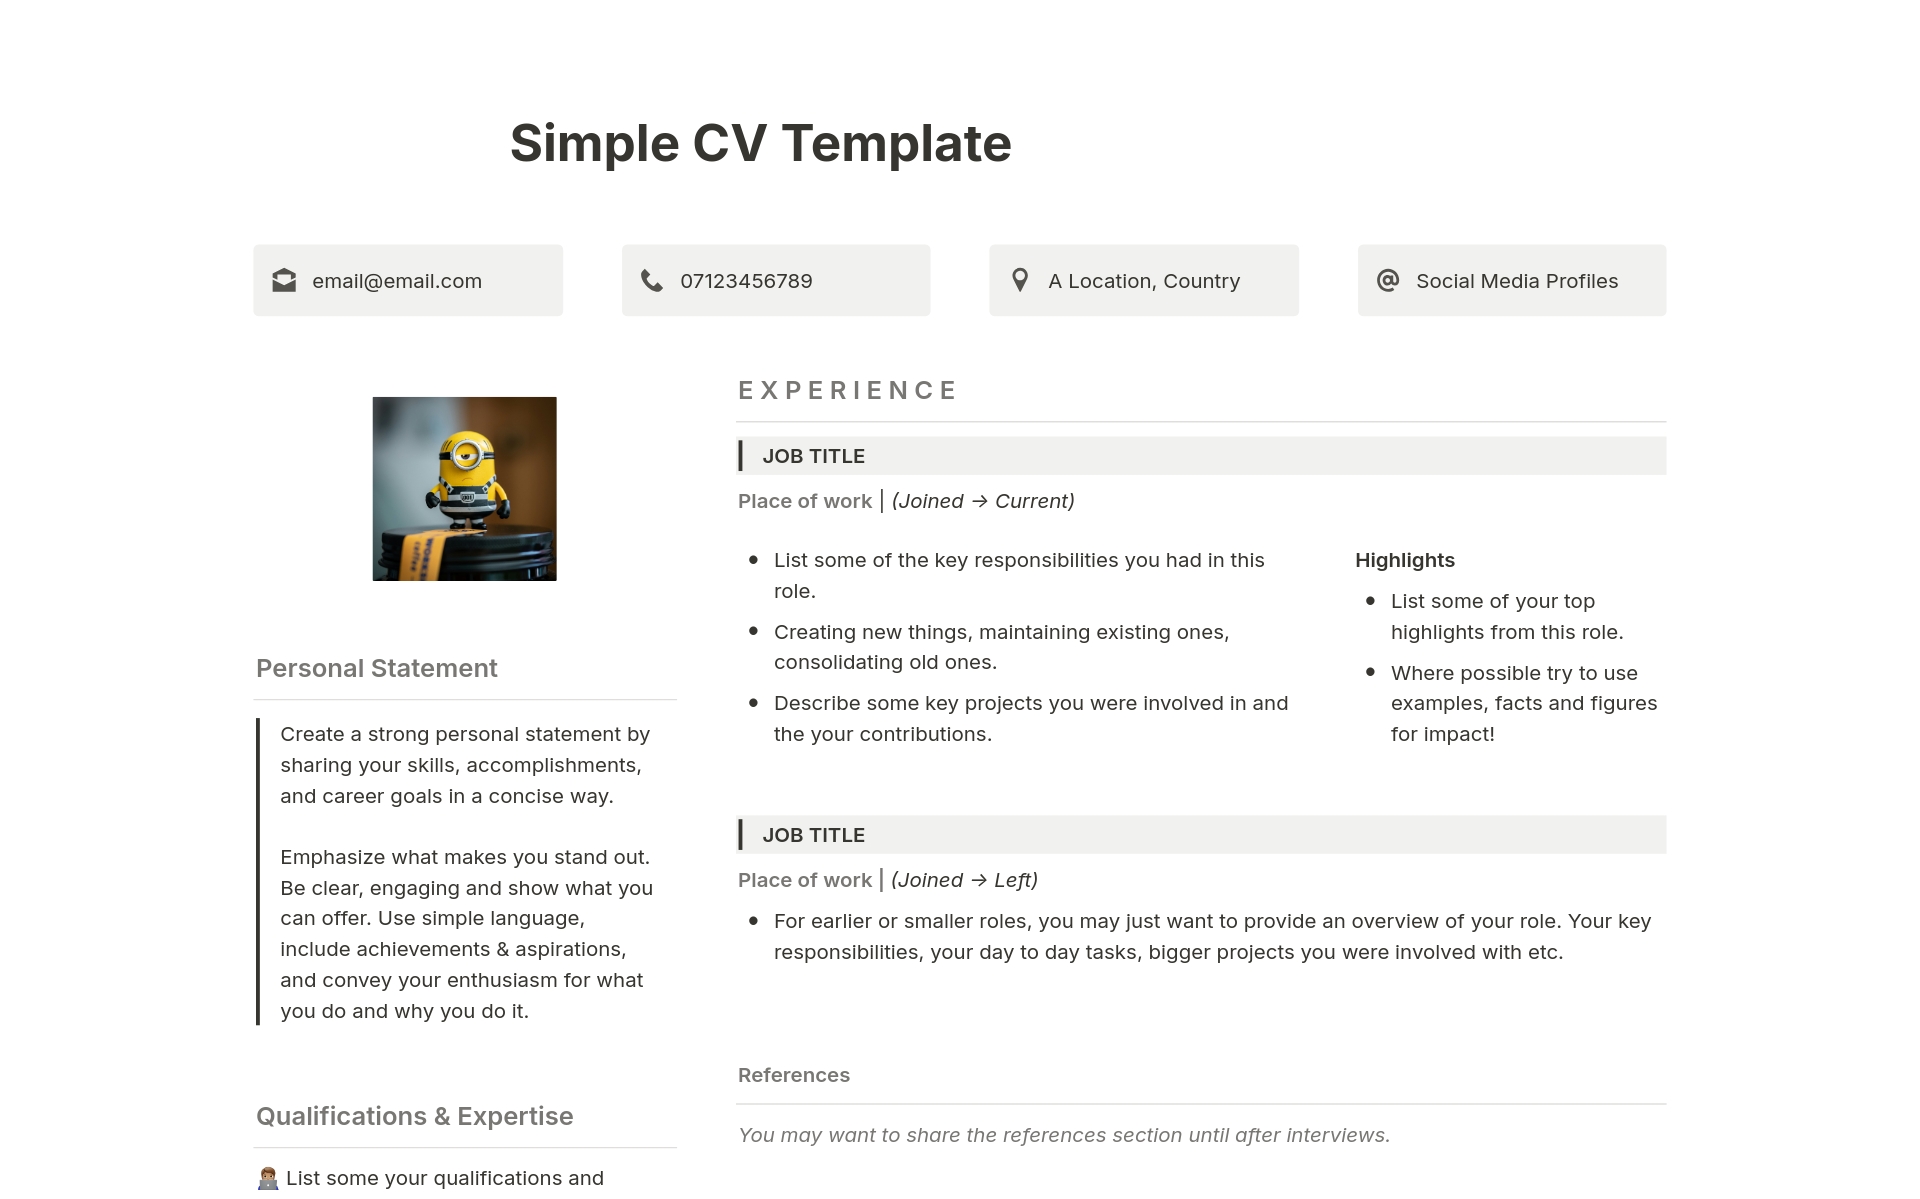 Use this simple CV template to send to potential employers. With a clean and clear layout, you can share a link to your online CV, or download to share as a file.